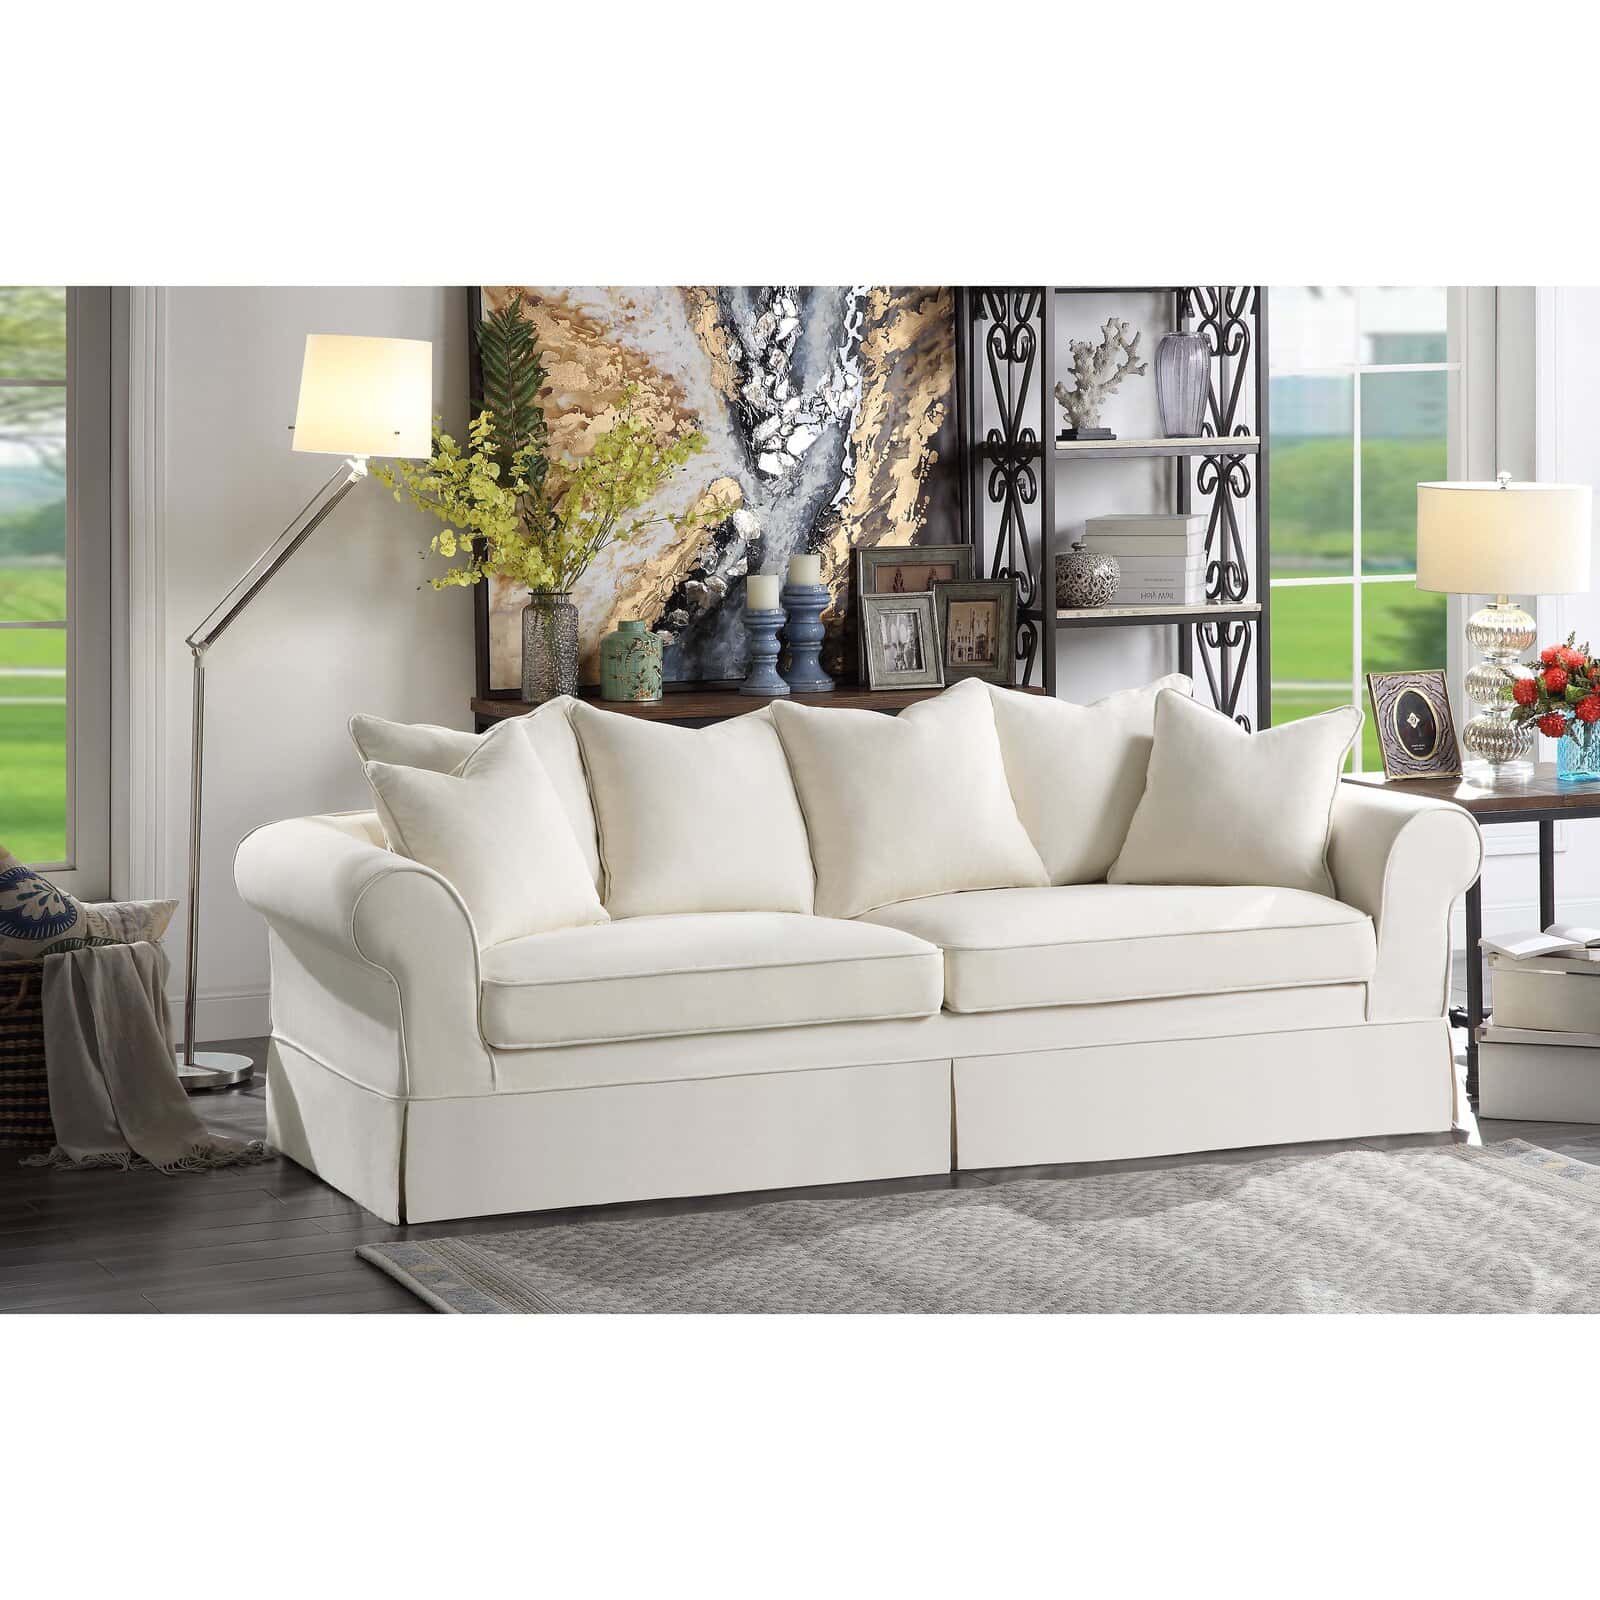 Keep it Casual with a Slip-Covered Sofa